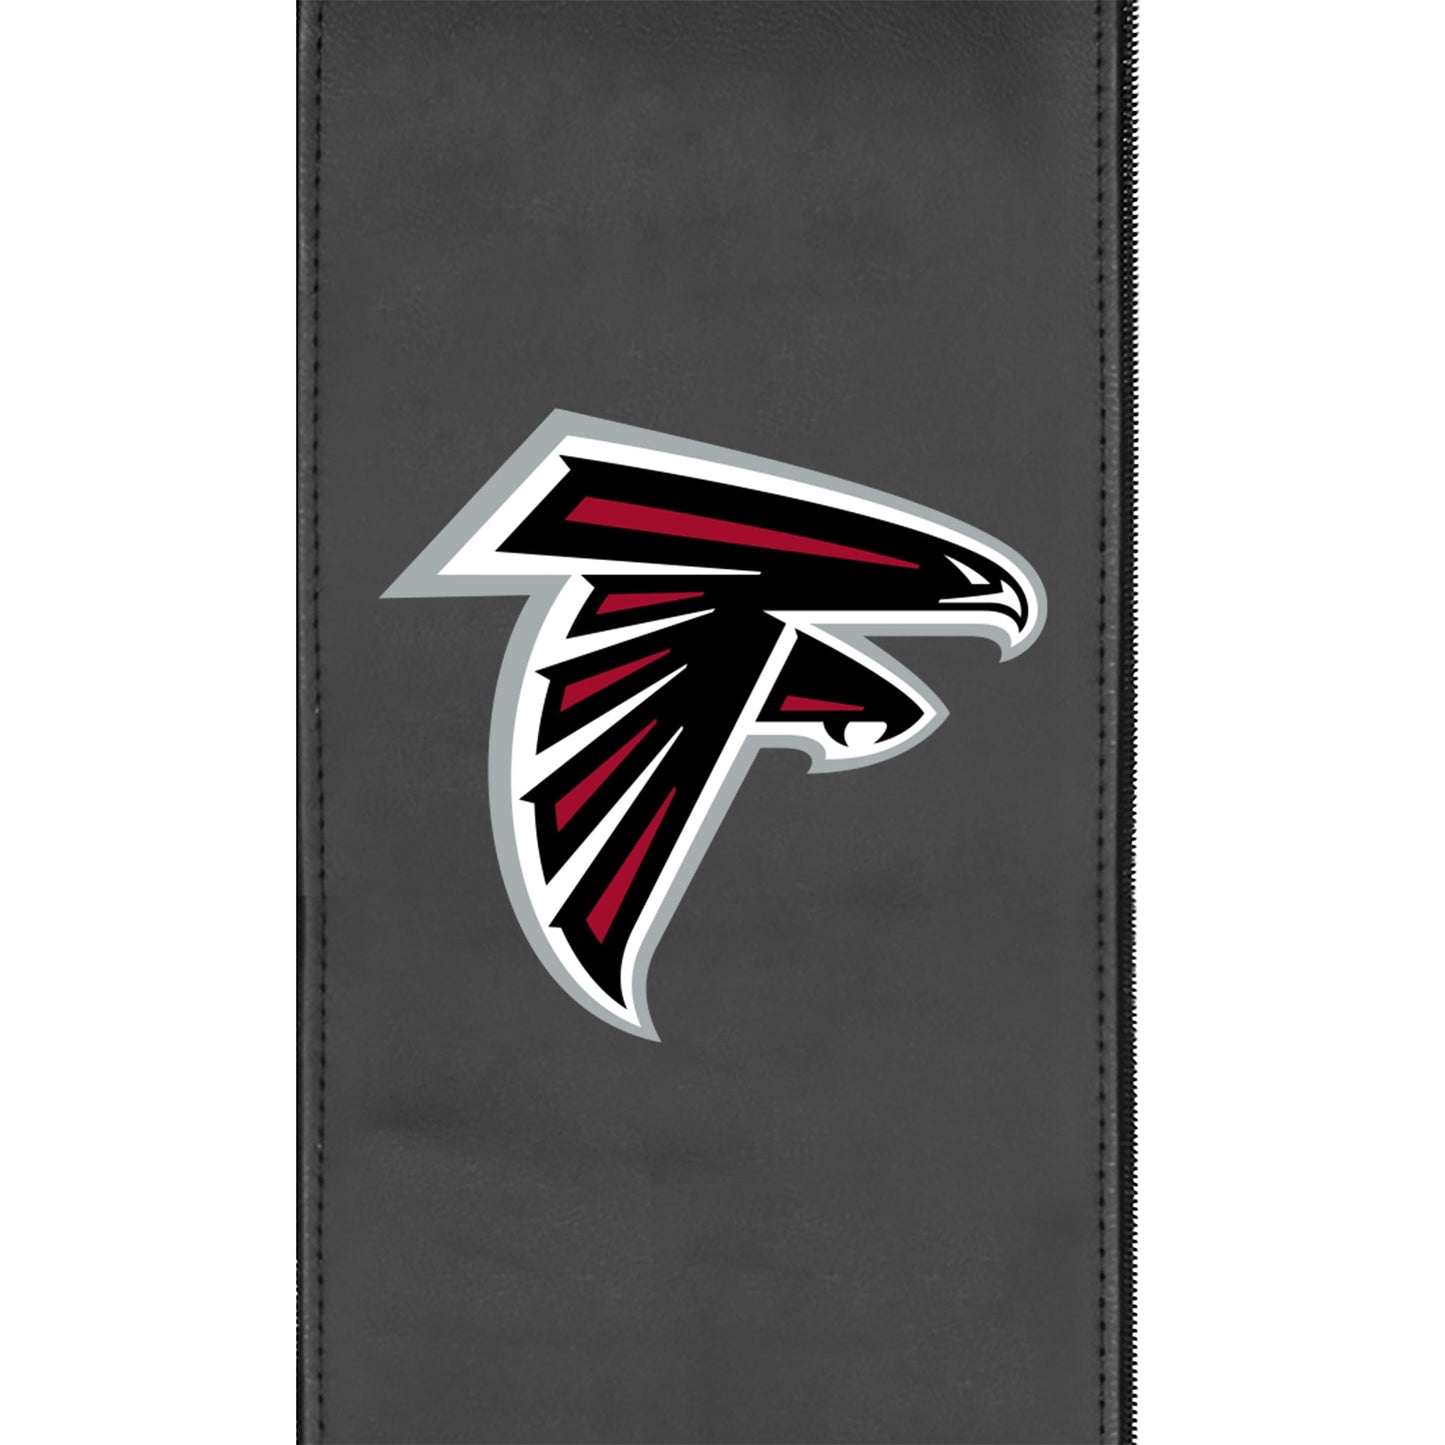 Relax Home Theater Recliner with Atlanta Falcons Primary Logo